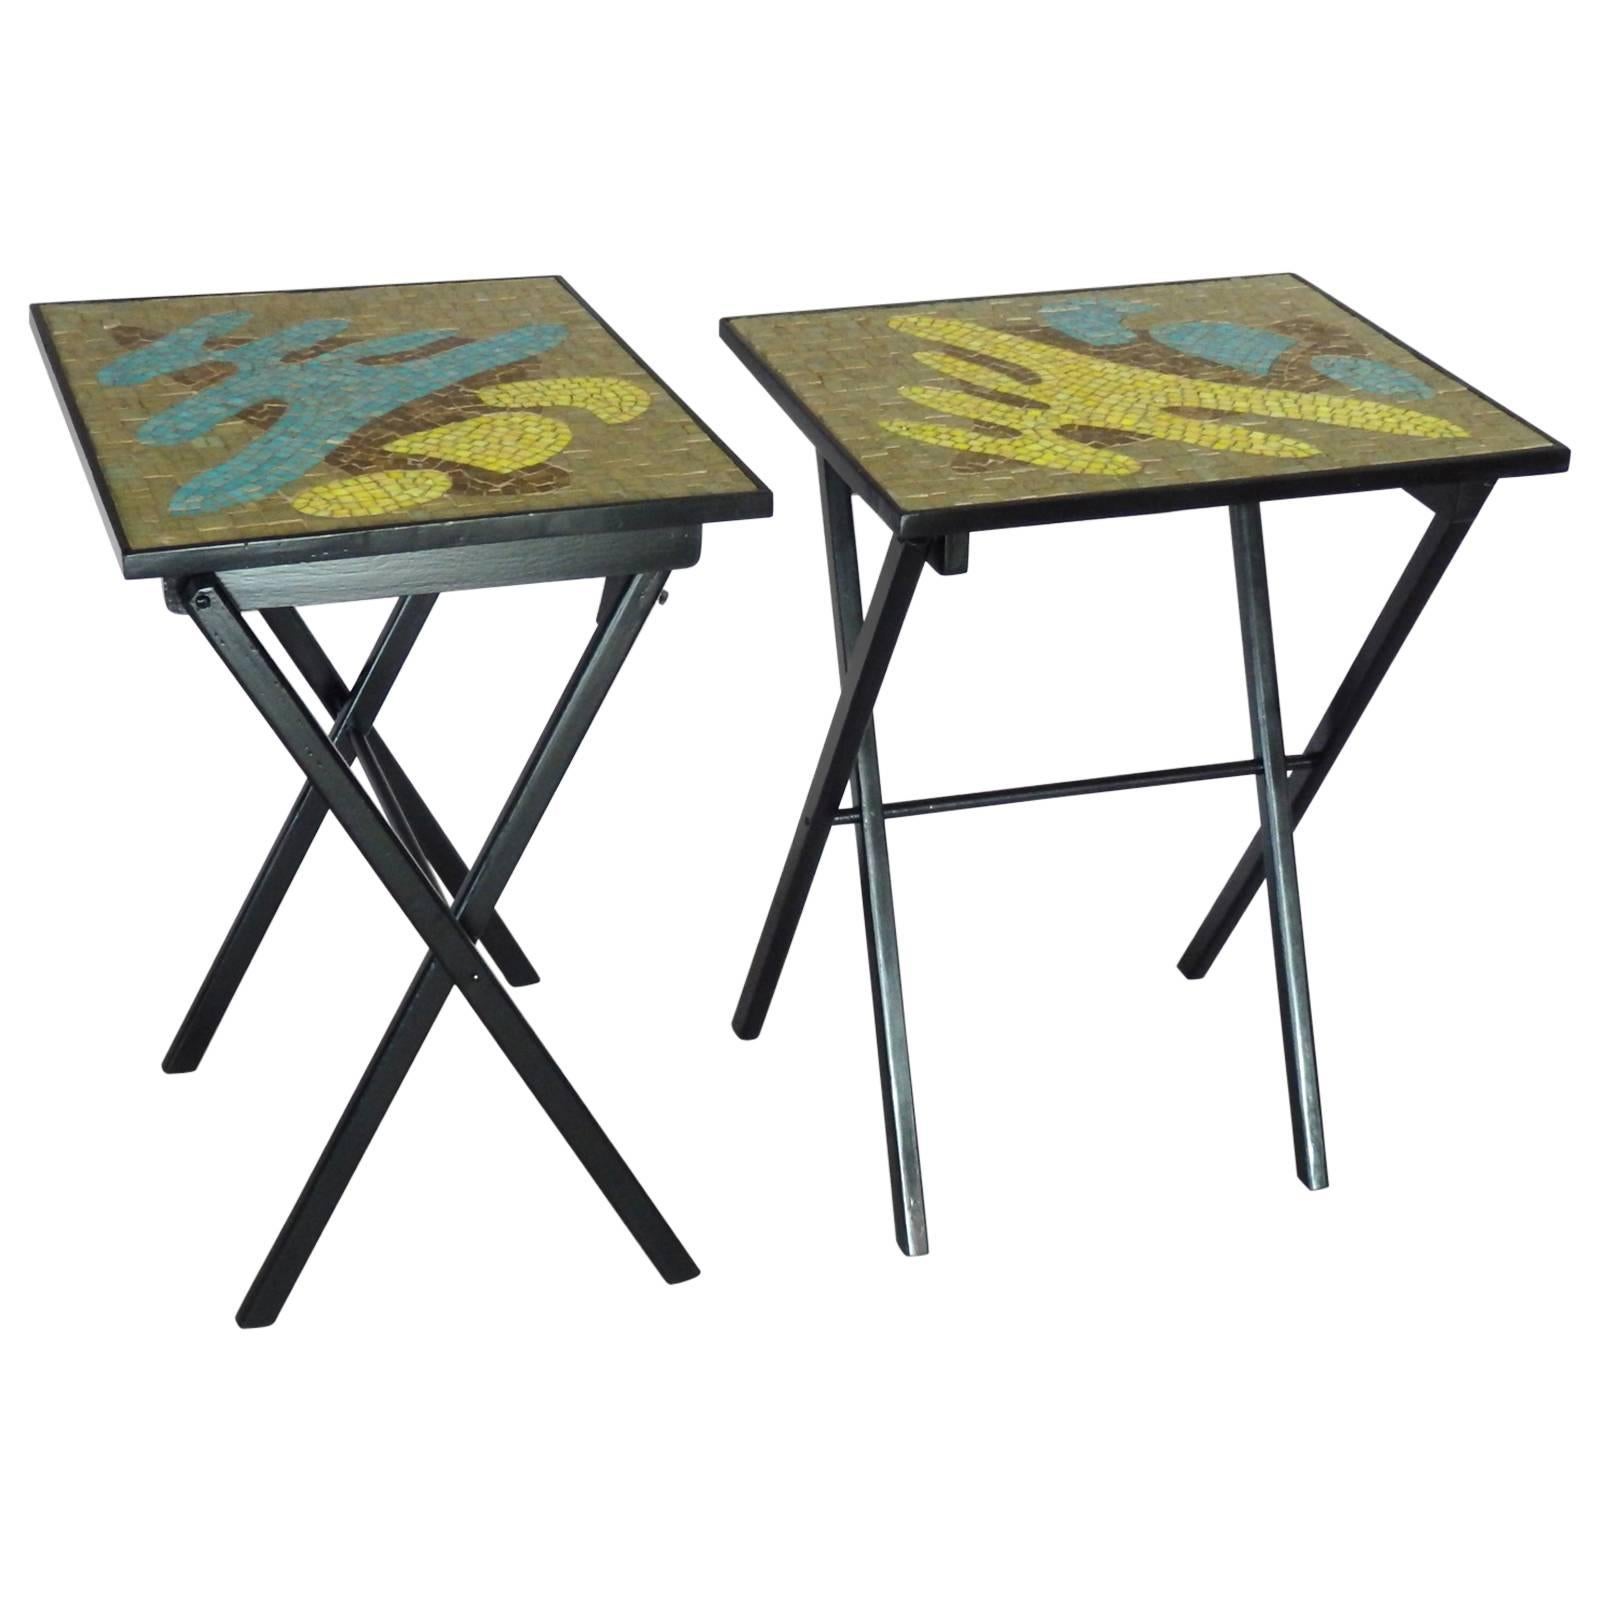 Pair of Organic Design Mosaic Glass Tile Top Fold Up Tables